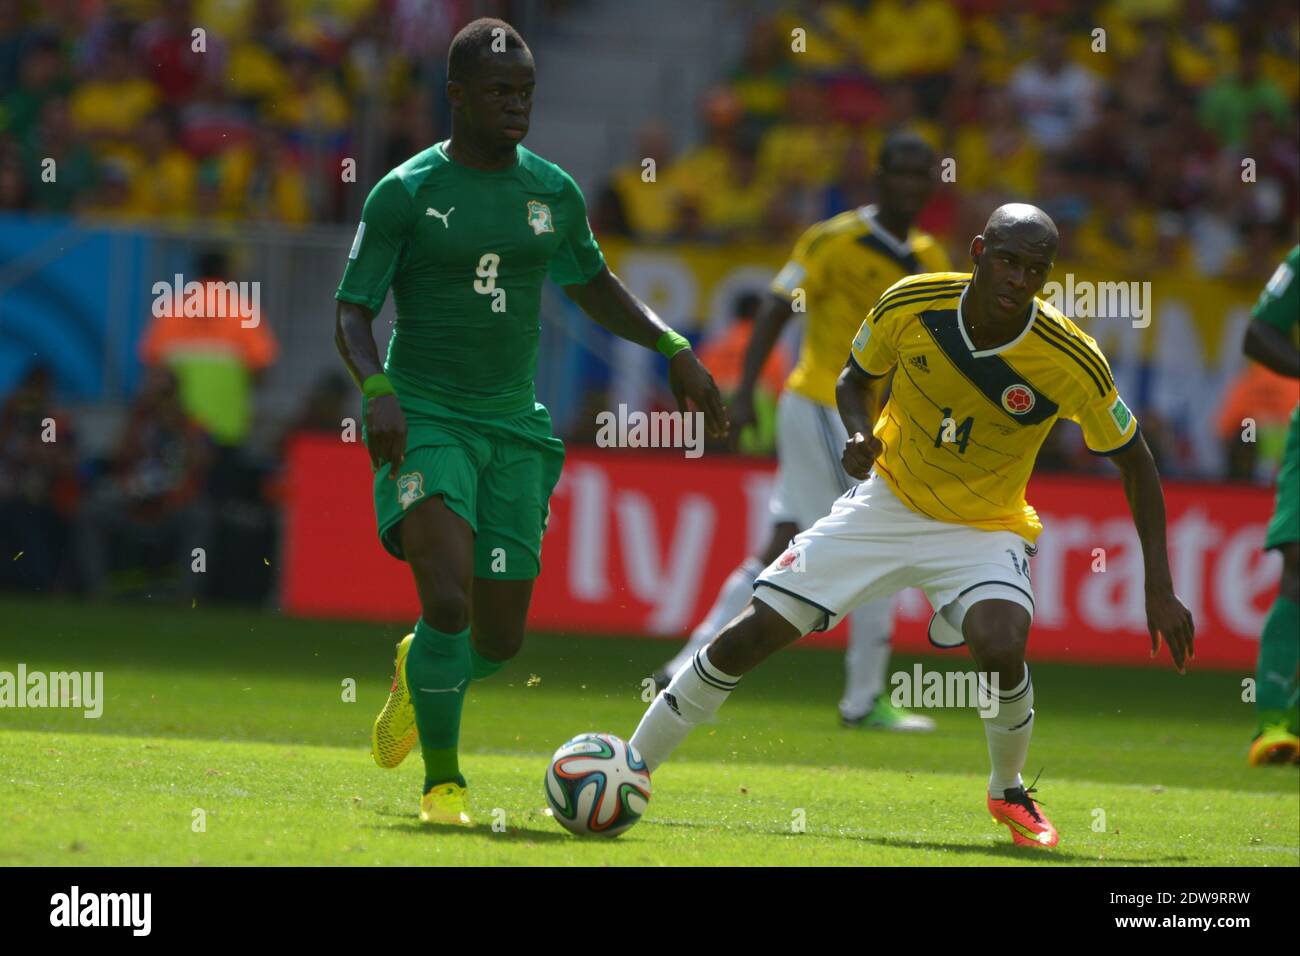 Colombia's Victor Ibarbo battling Ivory Coast's Ismael Tiote during soccer World Cup 2014 First round Group D match Colombia v Ivory Coast at National Stadium, Brasilia, Brazil , on June 19, 2014. Colombia won 2-1. Photo by Henri Szwarc/ABACAPRESS.COM Stock Photo